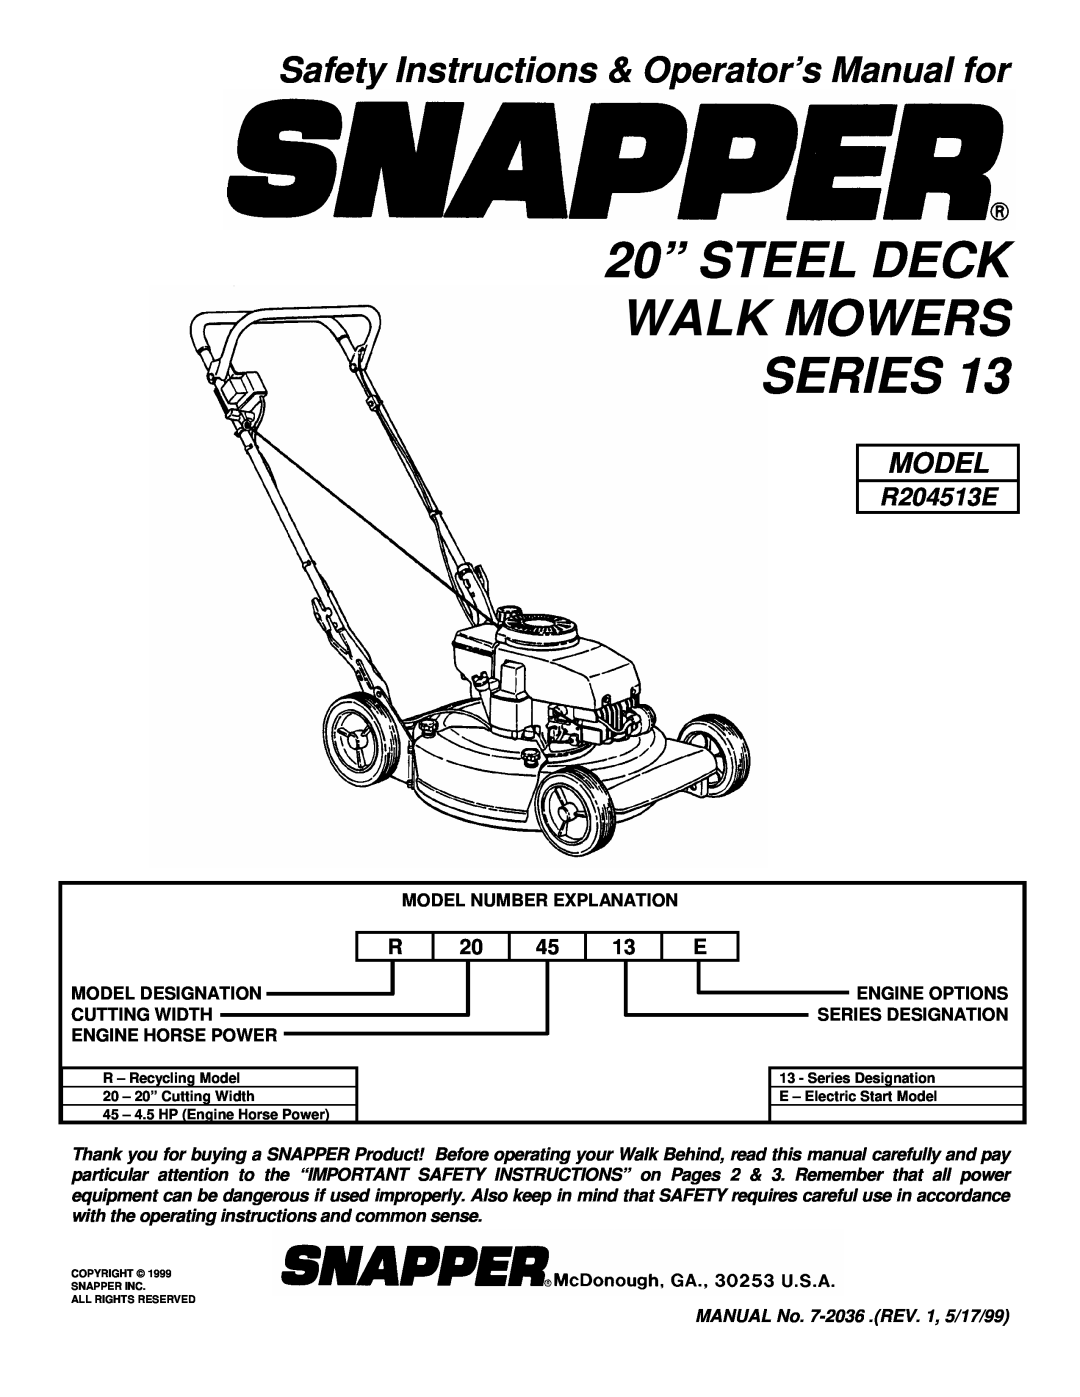 Snapper R204513E important safety instructions 20” STEEL DECK WALK MOWERS SERIES, Model 